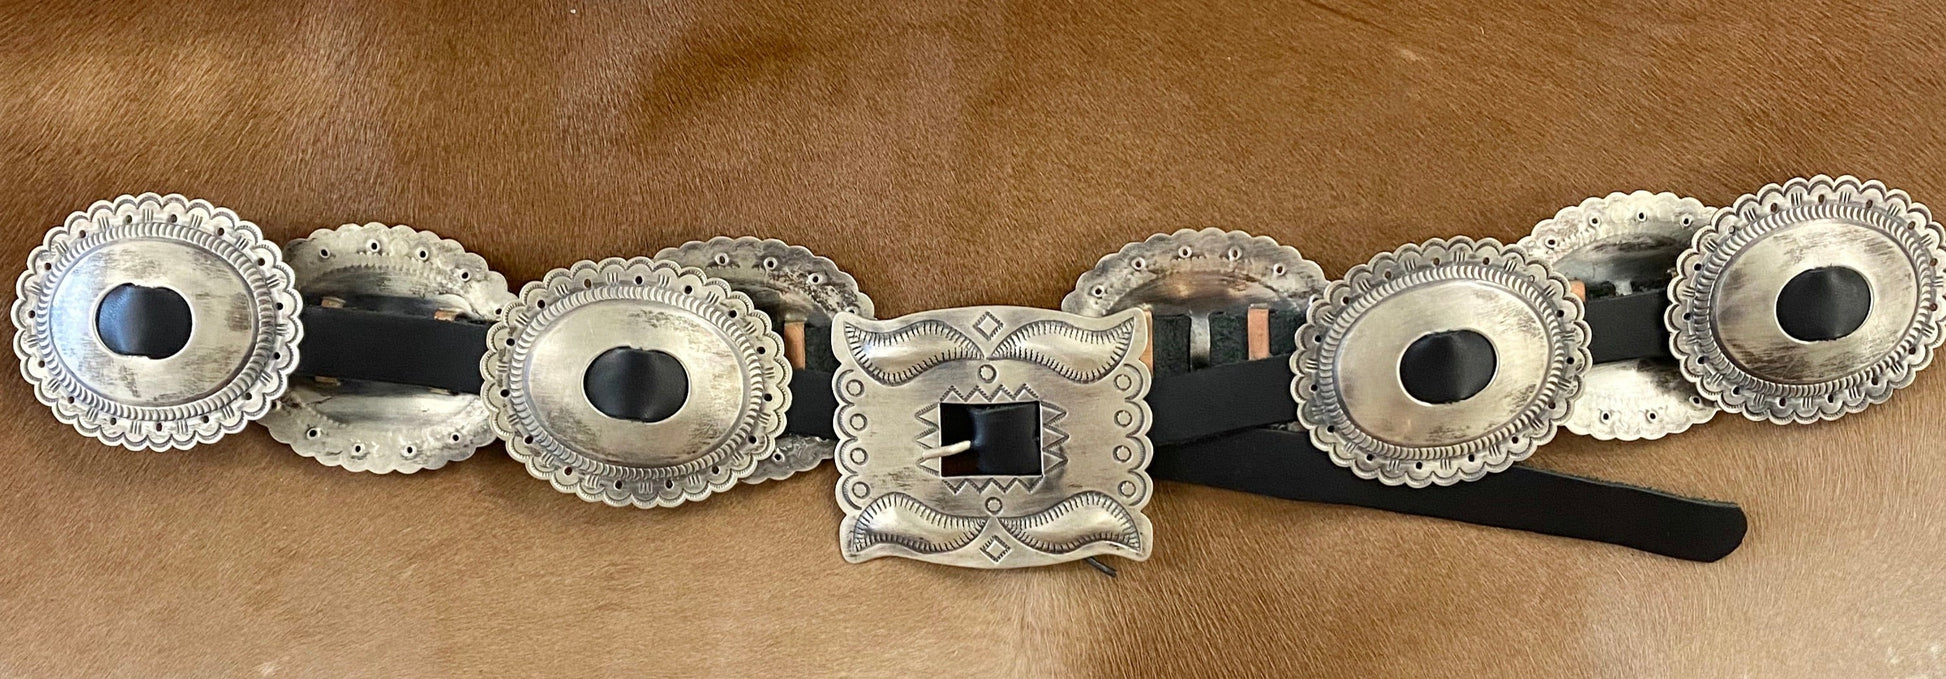 The Sterling Concho Belt - Ny Texas Style Boutique 44” inches from buckle to end of black leather silver Native American made Concho sterling silver signed large concho belt. Signed "RS" on the back of the buckle piece by native artist silversmith Roger Skeet. This beautiful handmade concho belt features 8 Conchos plus buckle piece. The perfect silver concho belt on black leather to add to your accessory wardrobe.   Hallmark/Artist: Roger Skeet, Navajo